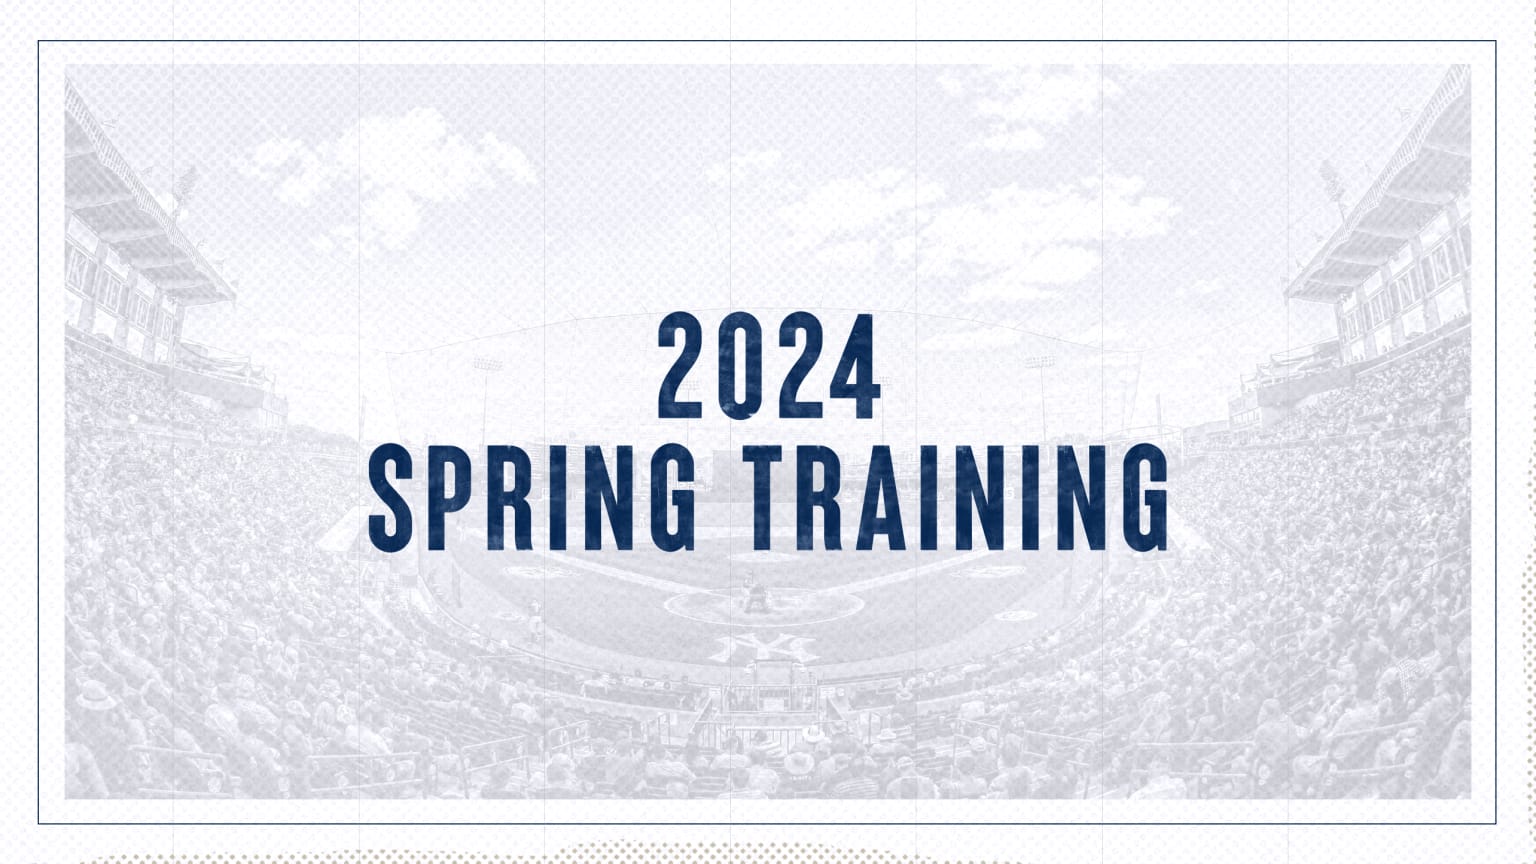 Here's the Yankees' full 2023 MLB Spring Training schedule